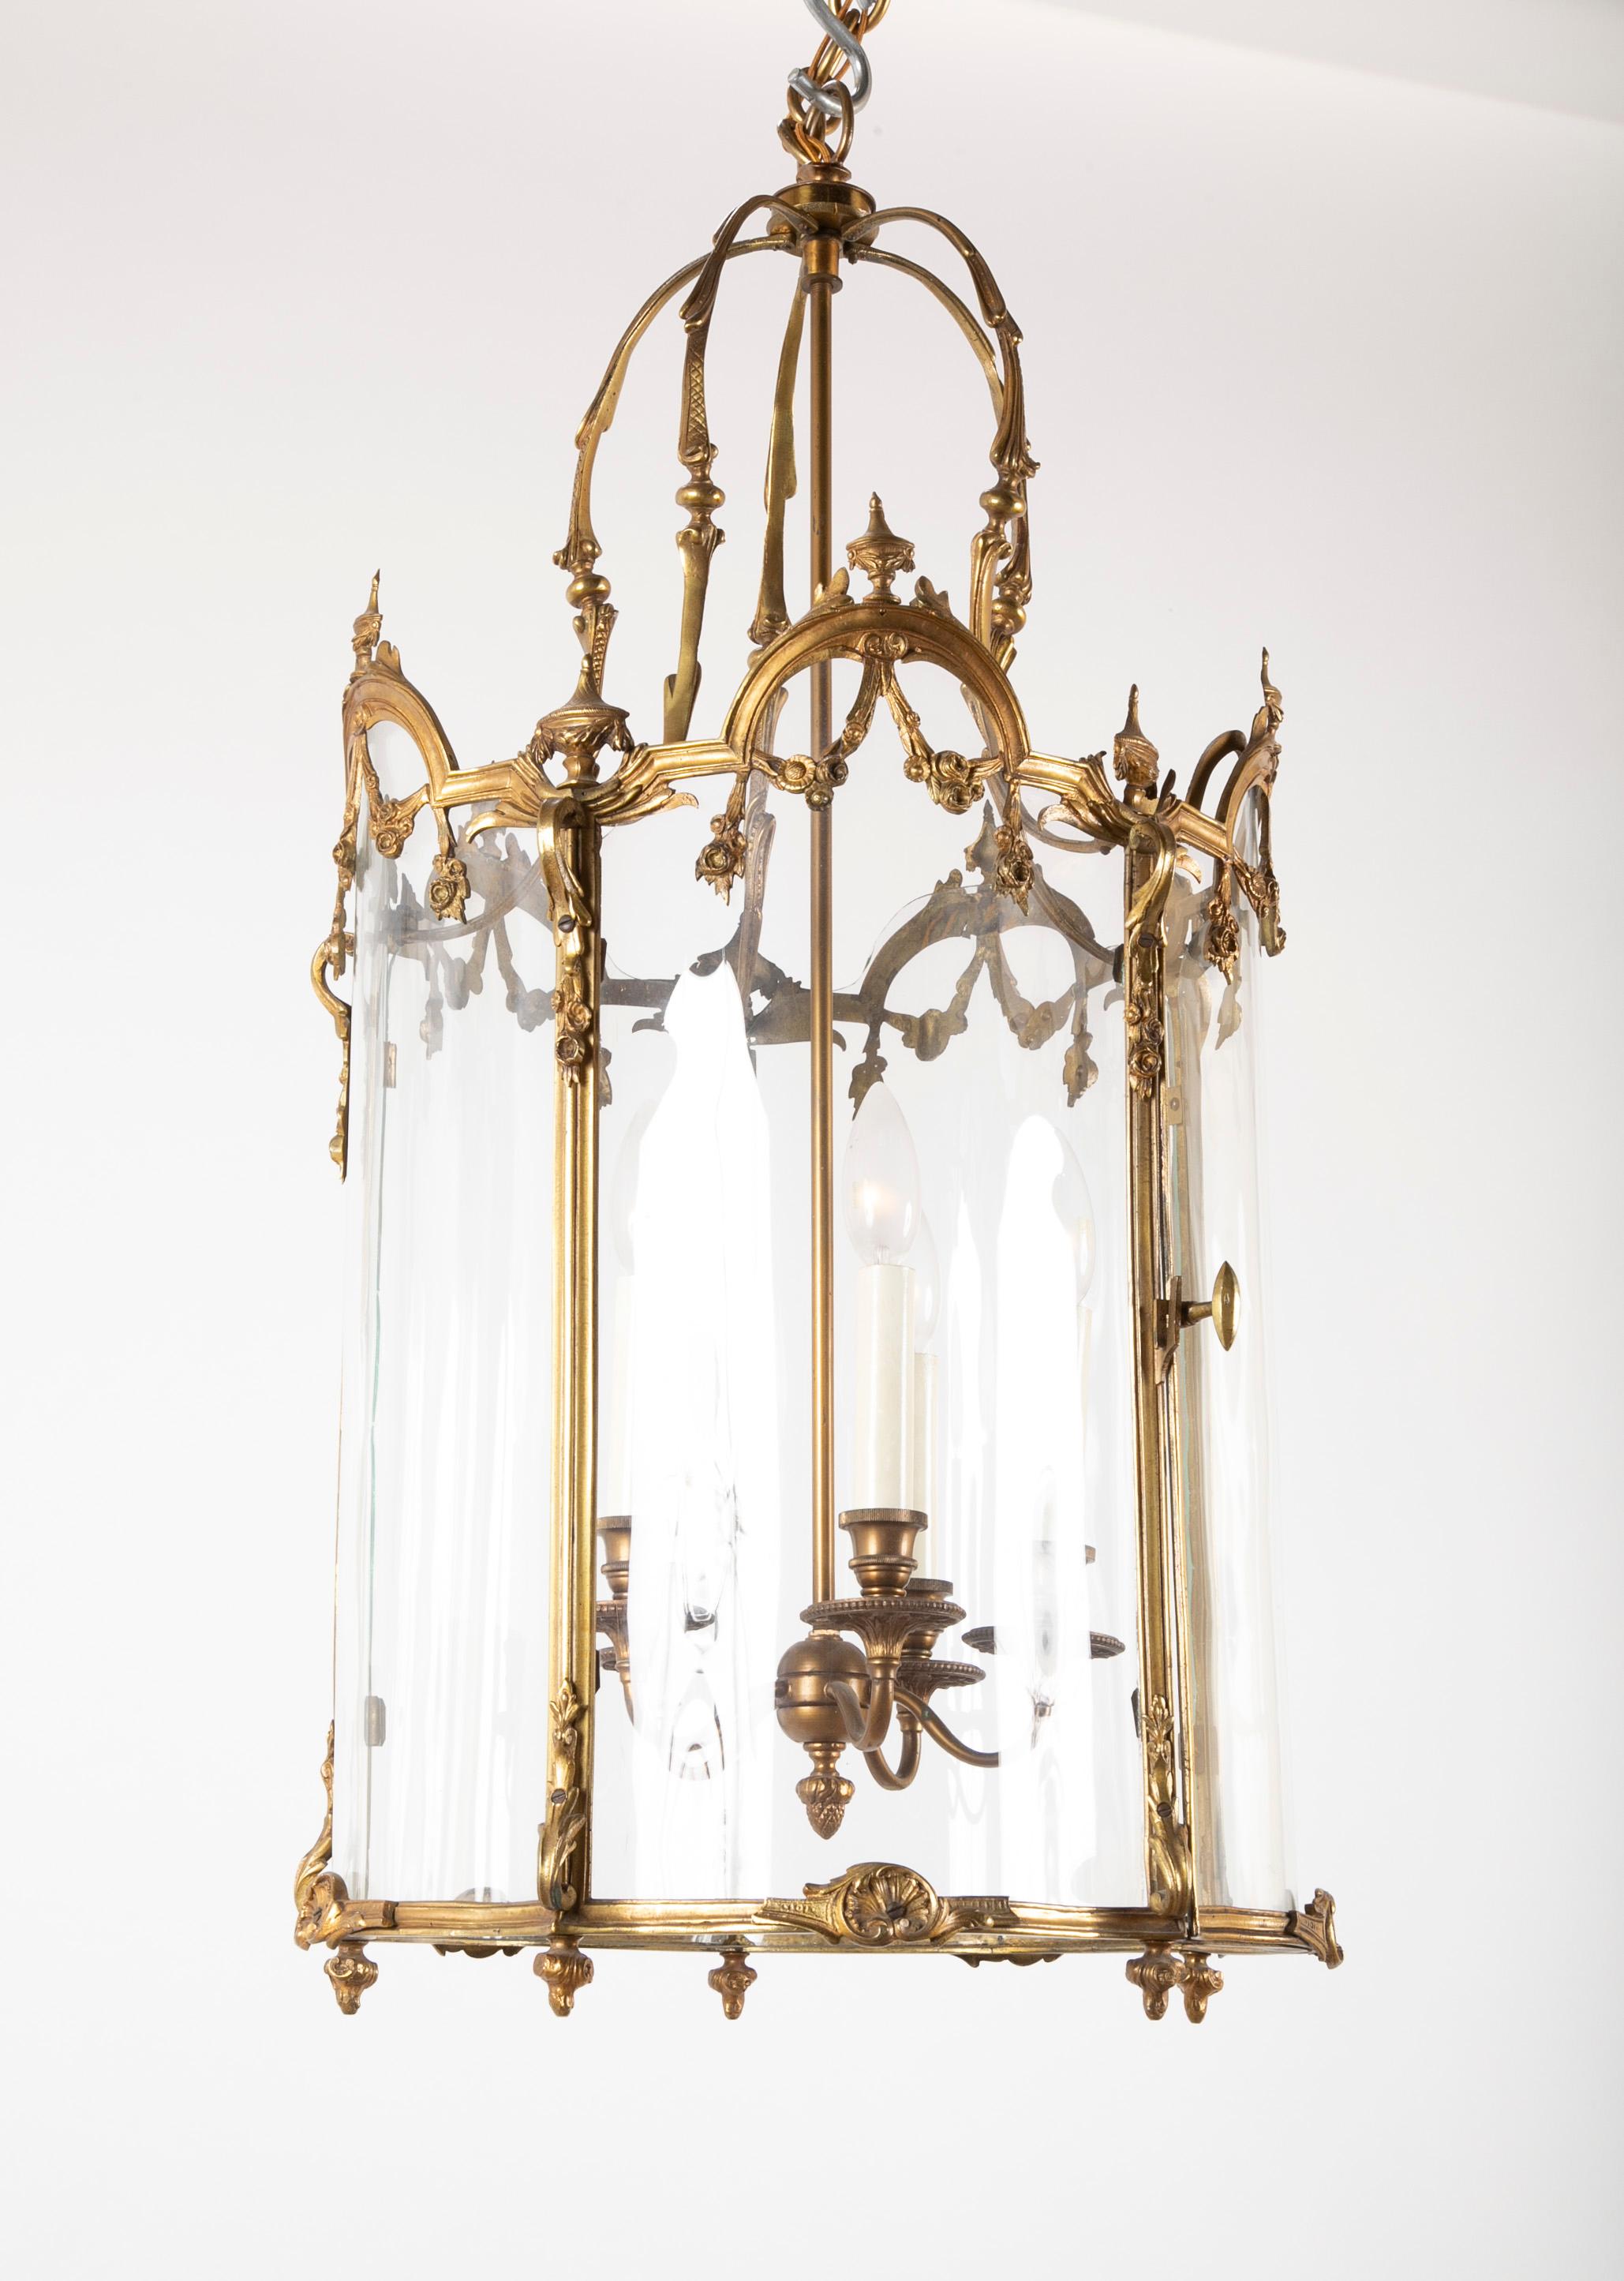 Bronze five-sided neoclassic form lantern with door, shaped glass and urn finials.